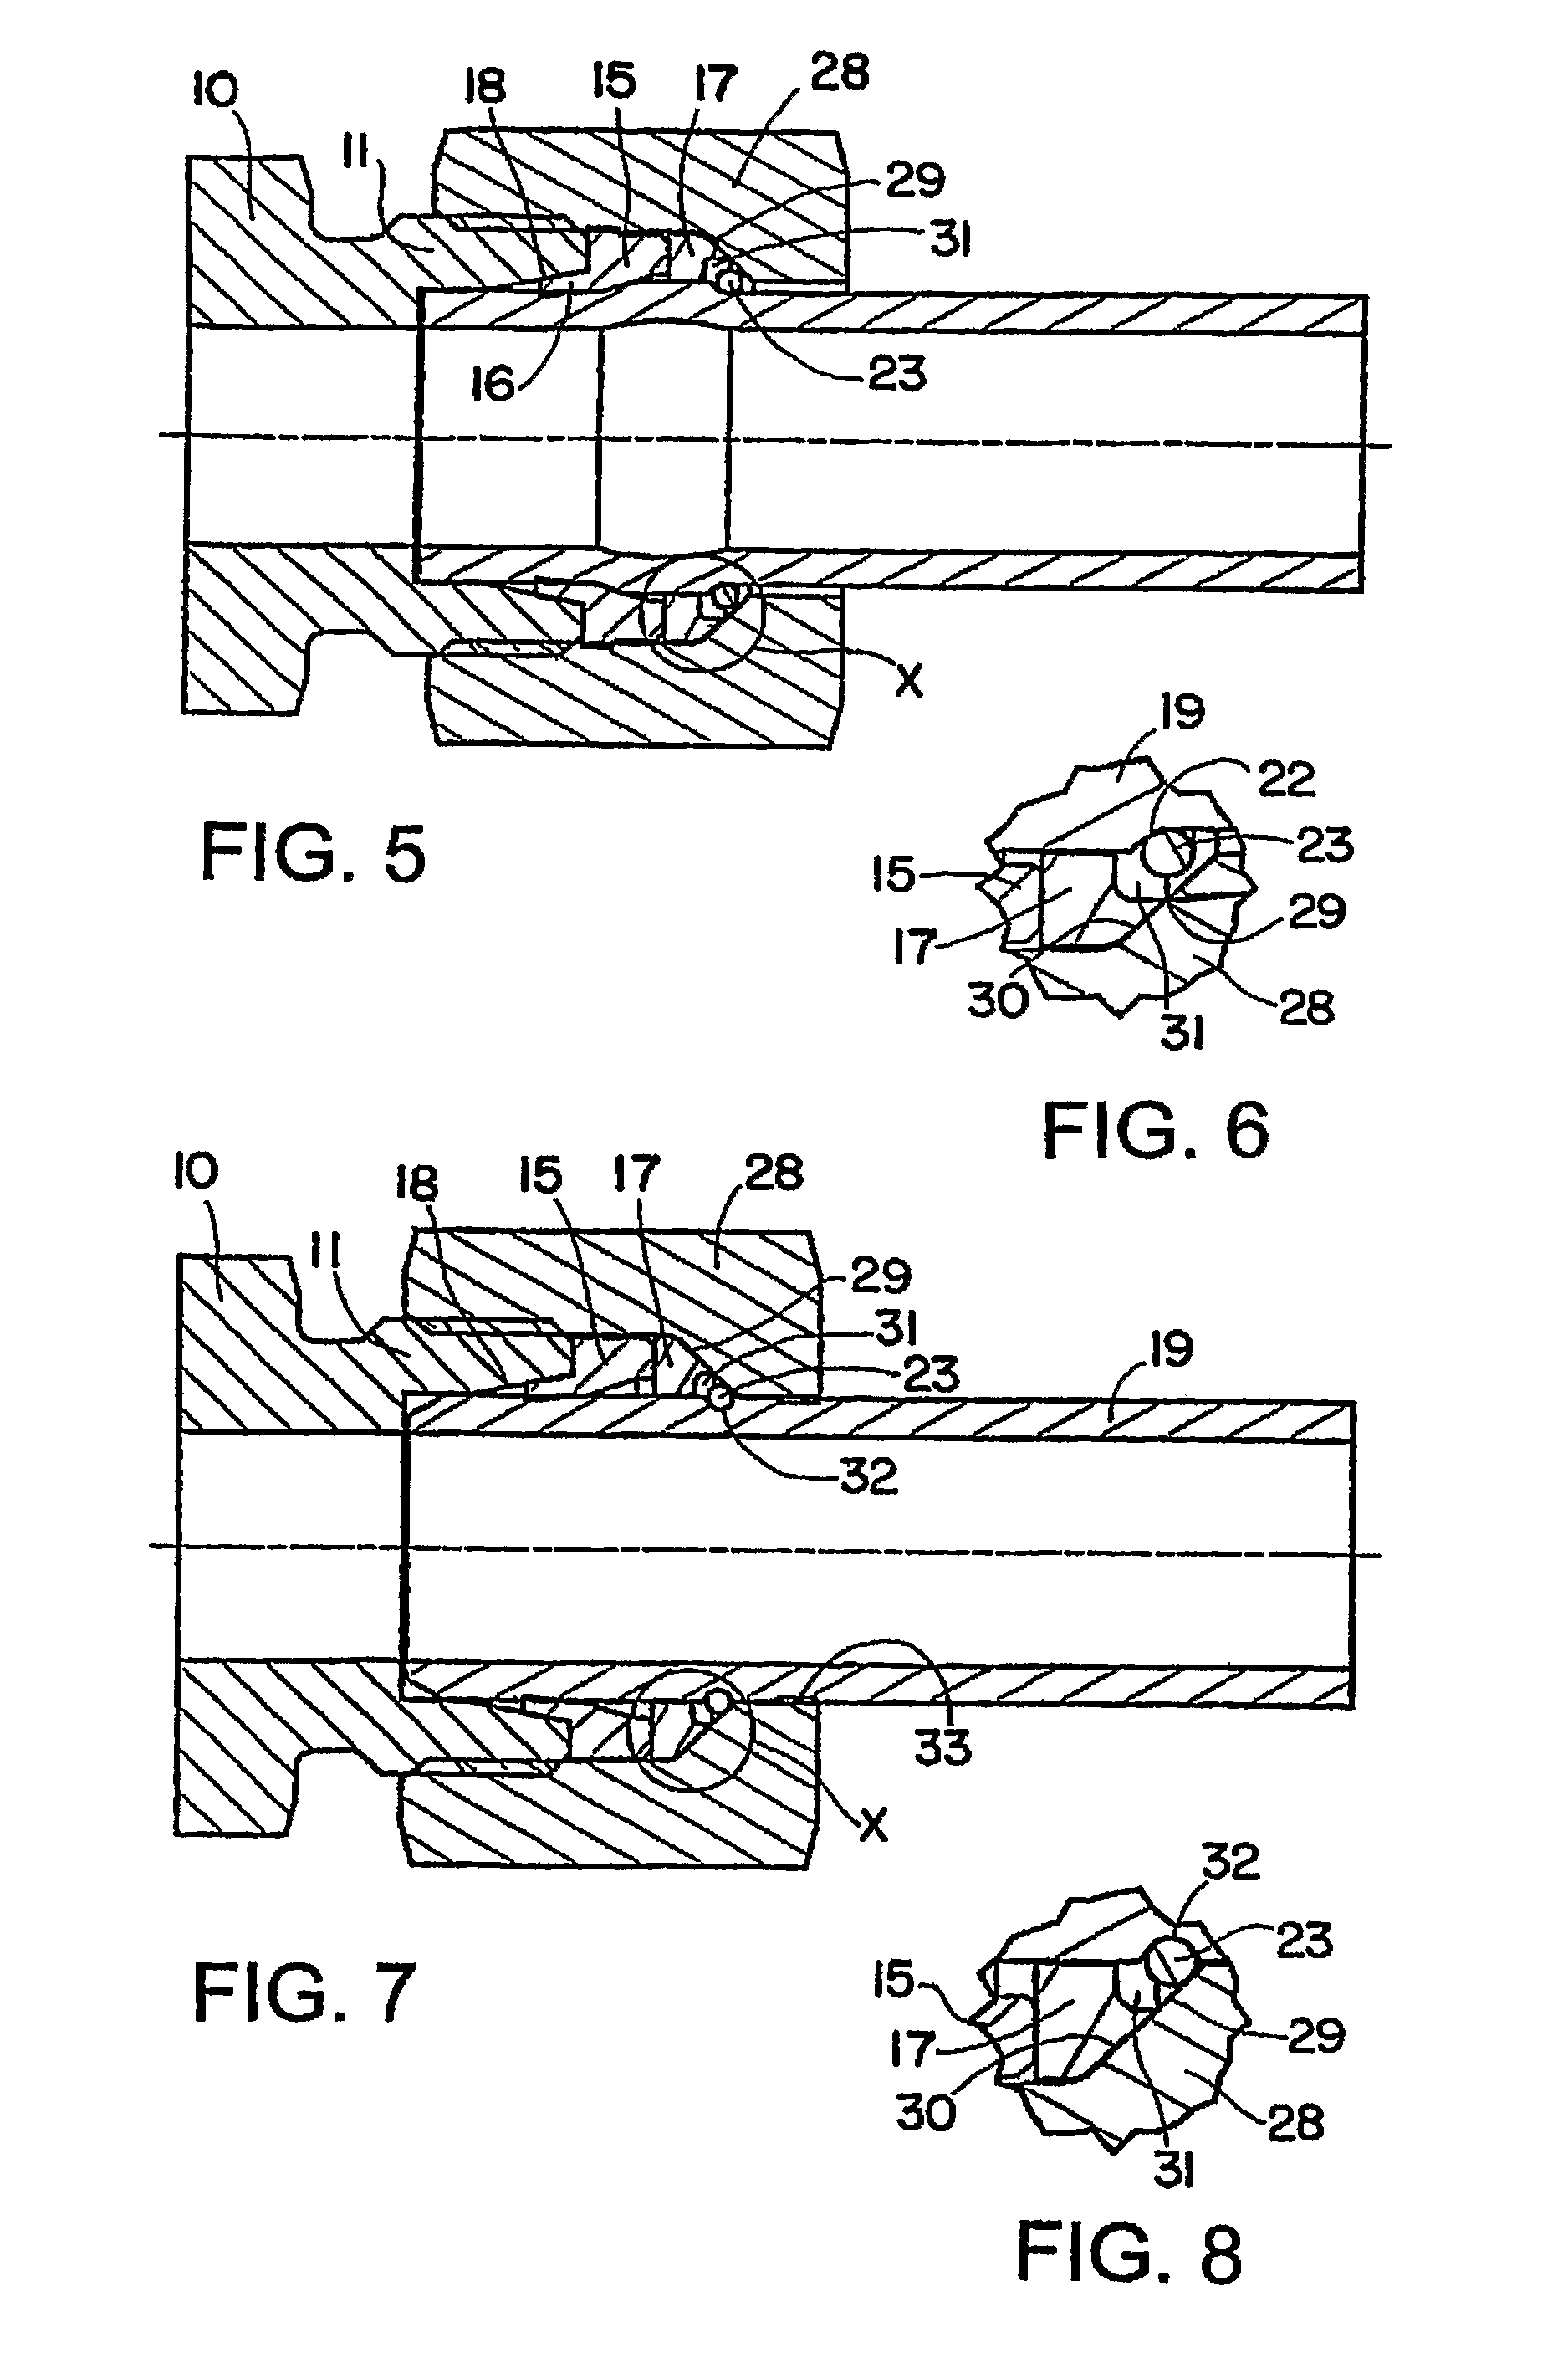 Adaptor and method for converting standard tube fitting/port to push-to-connect tube fitting/port